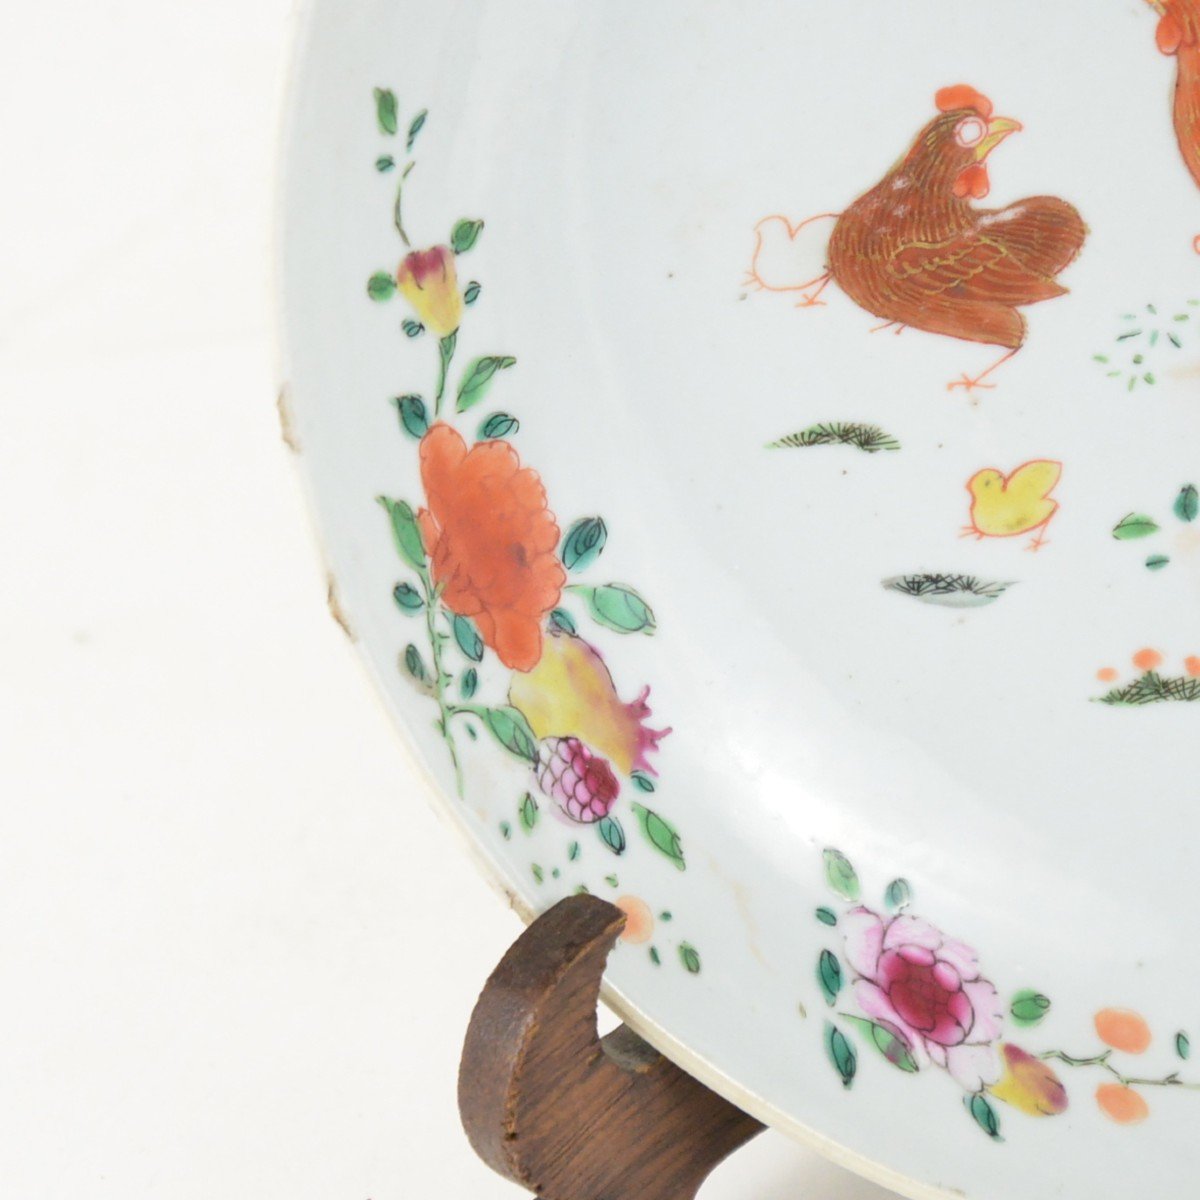 Chinese Porcelain Famille Rose Plate Guilded With Roosters, Qing Dynasty 18th Century-photo-1